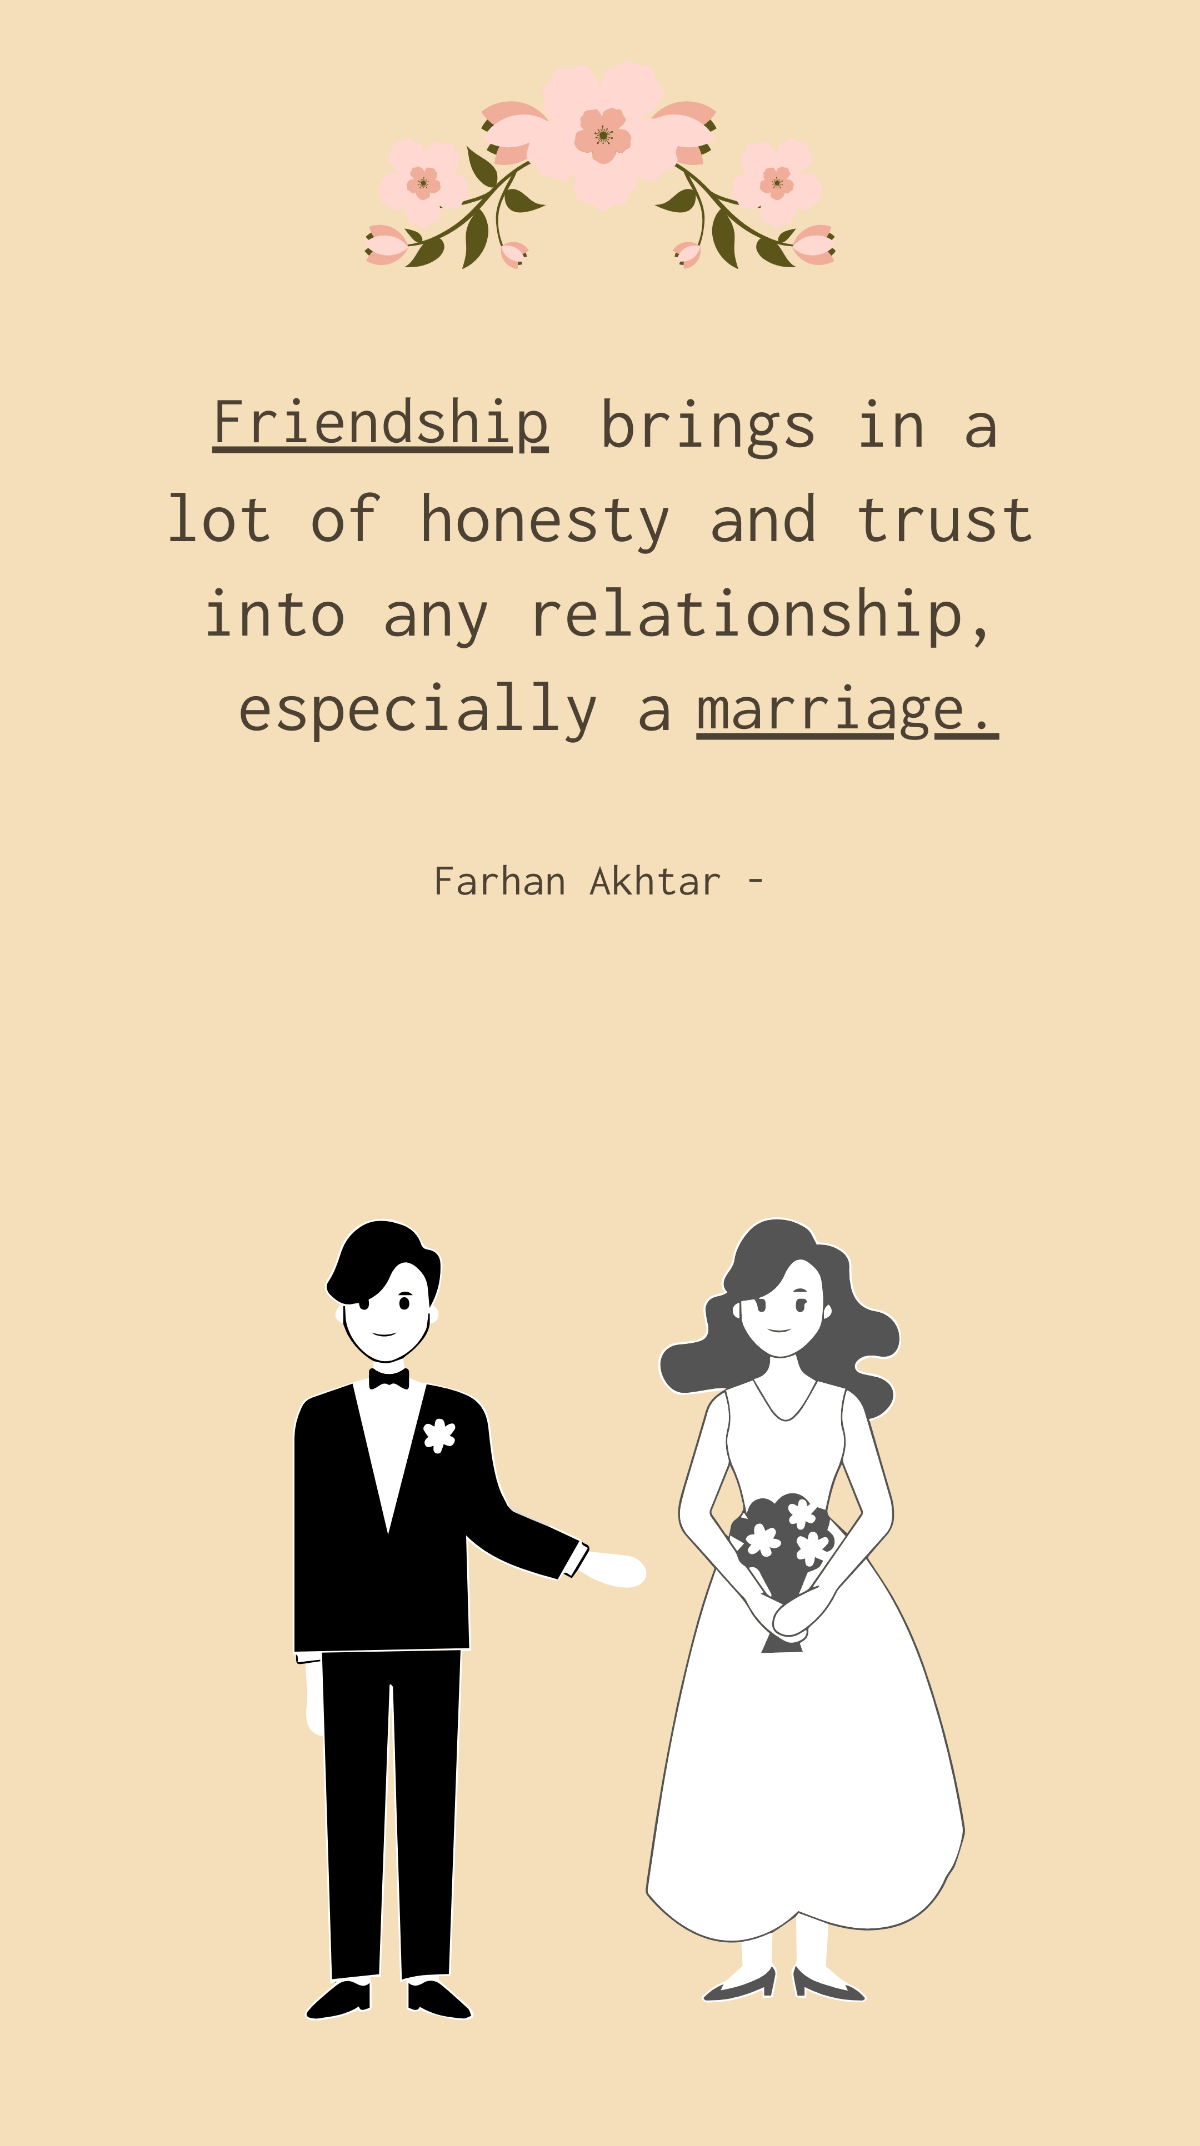 Farhan Akhtar - Friendship brings in a lot of honesty and trust into any relationship, especially a marriage. Template